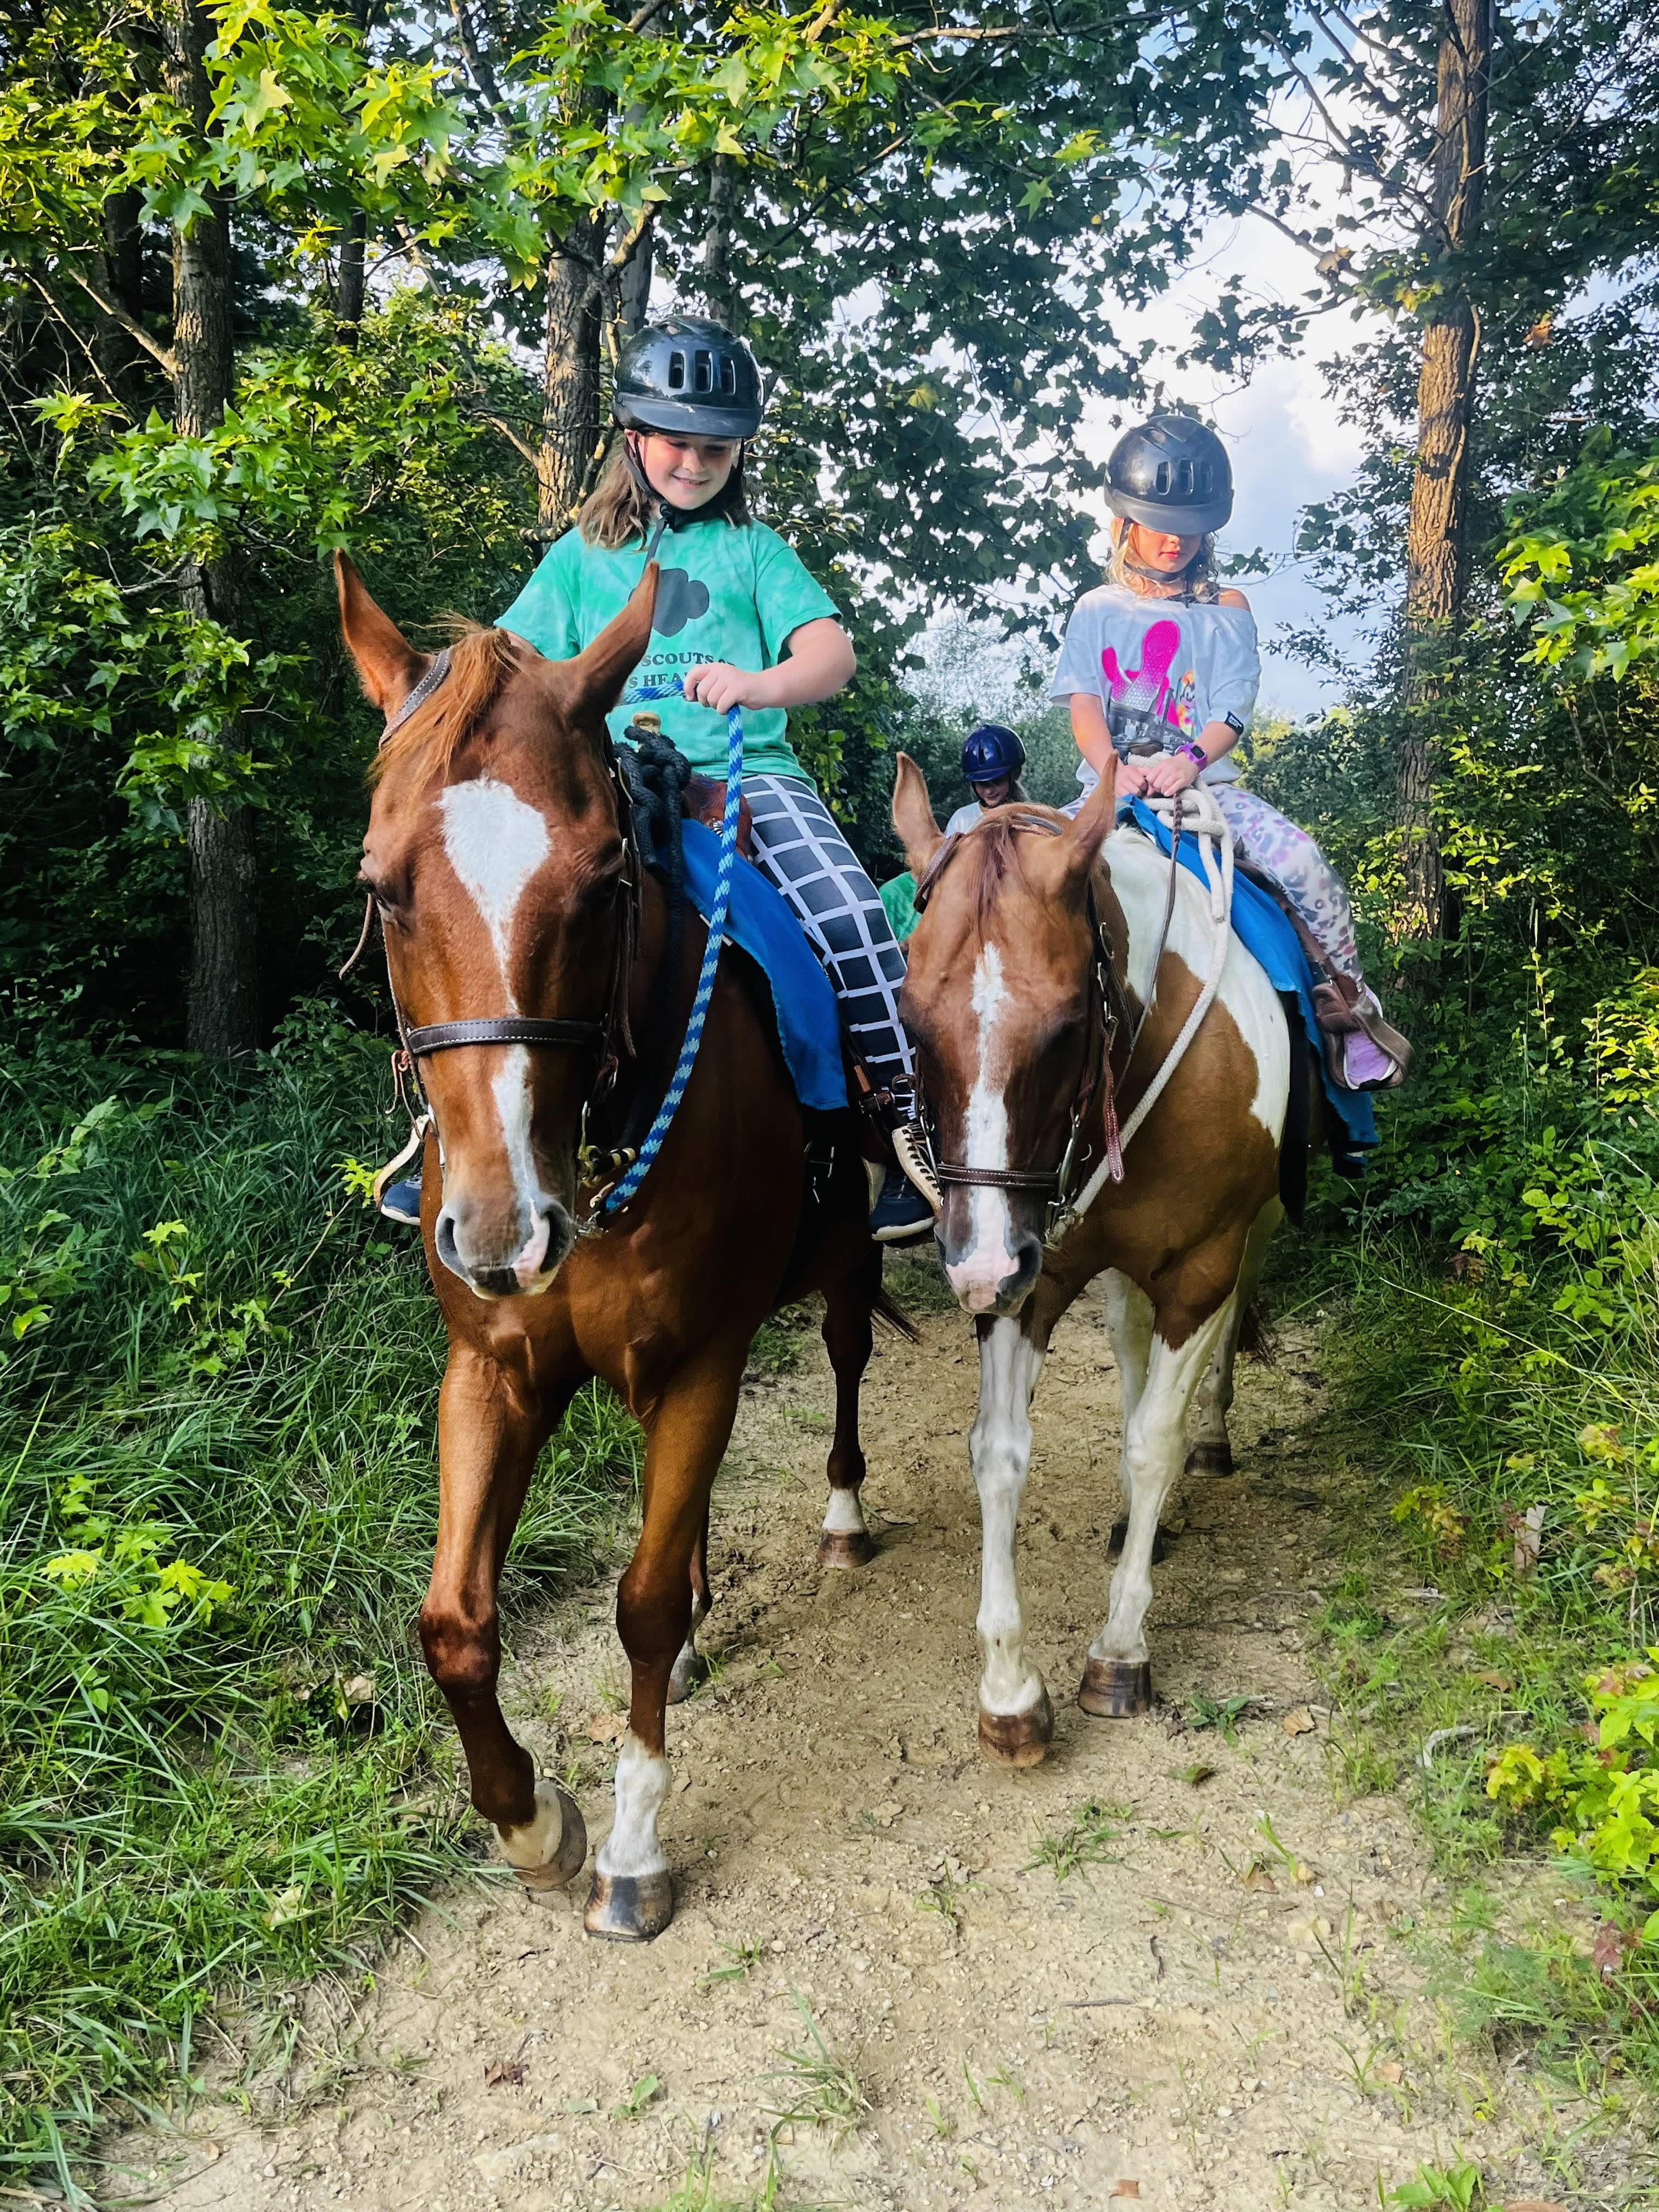 horse trail rides in ohio
best horseback trail riding near me
horseback trail riding in ohio
horse trail riding rentals near me
family horseback trail riding
OH